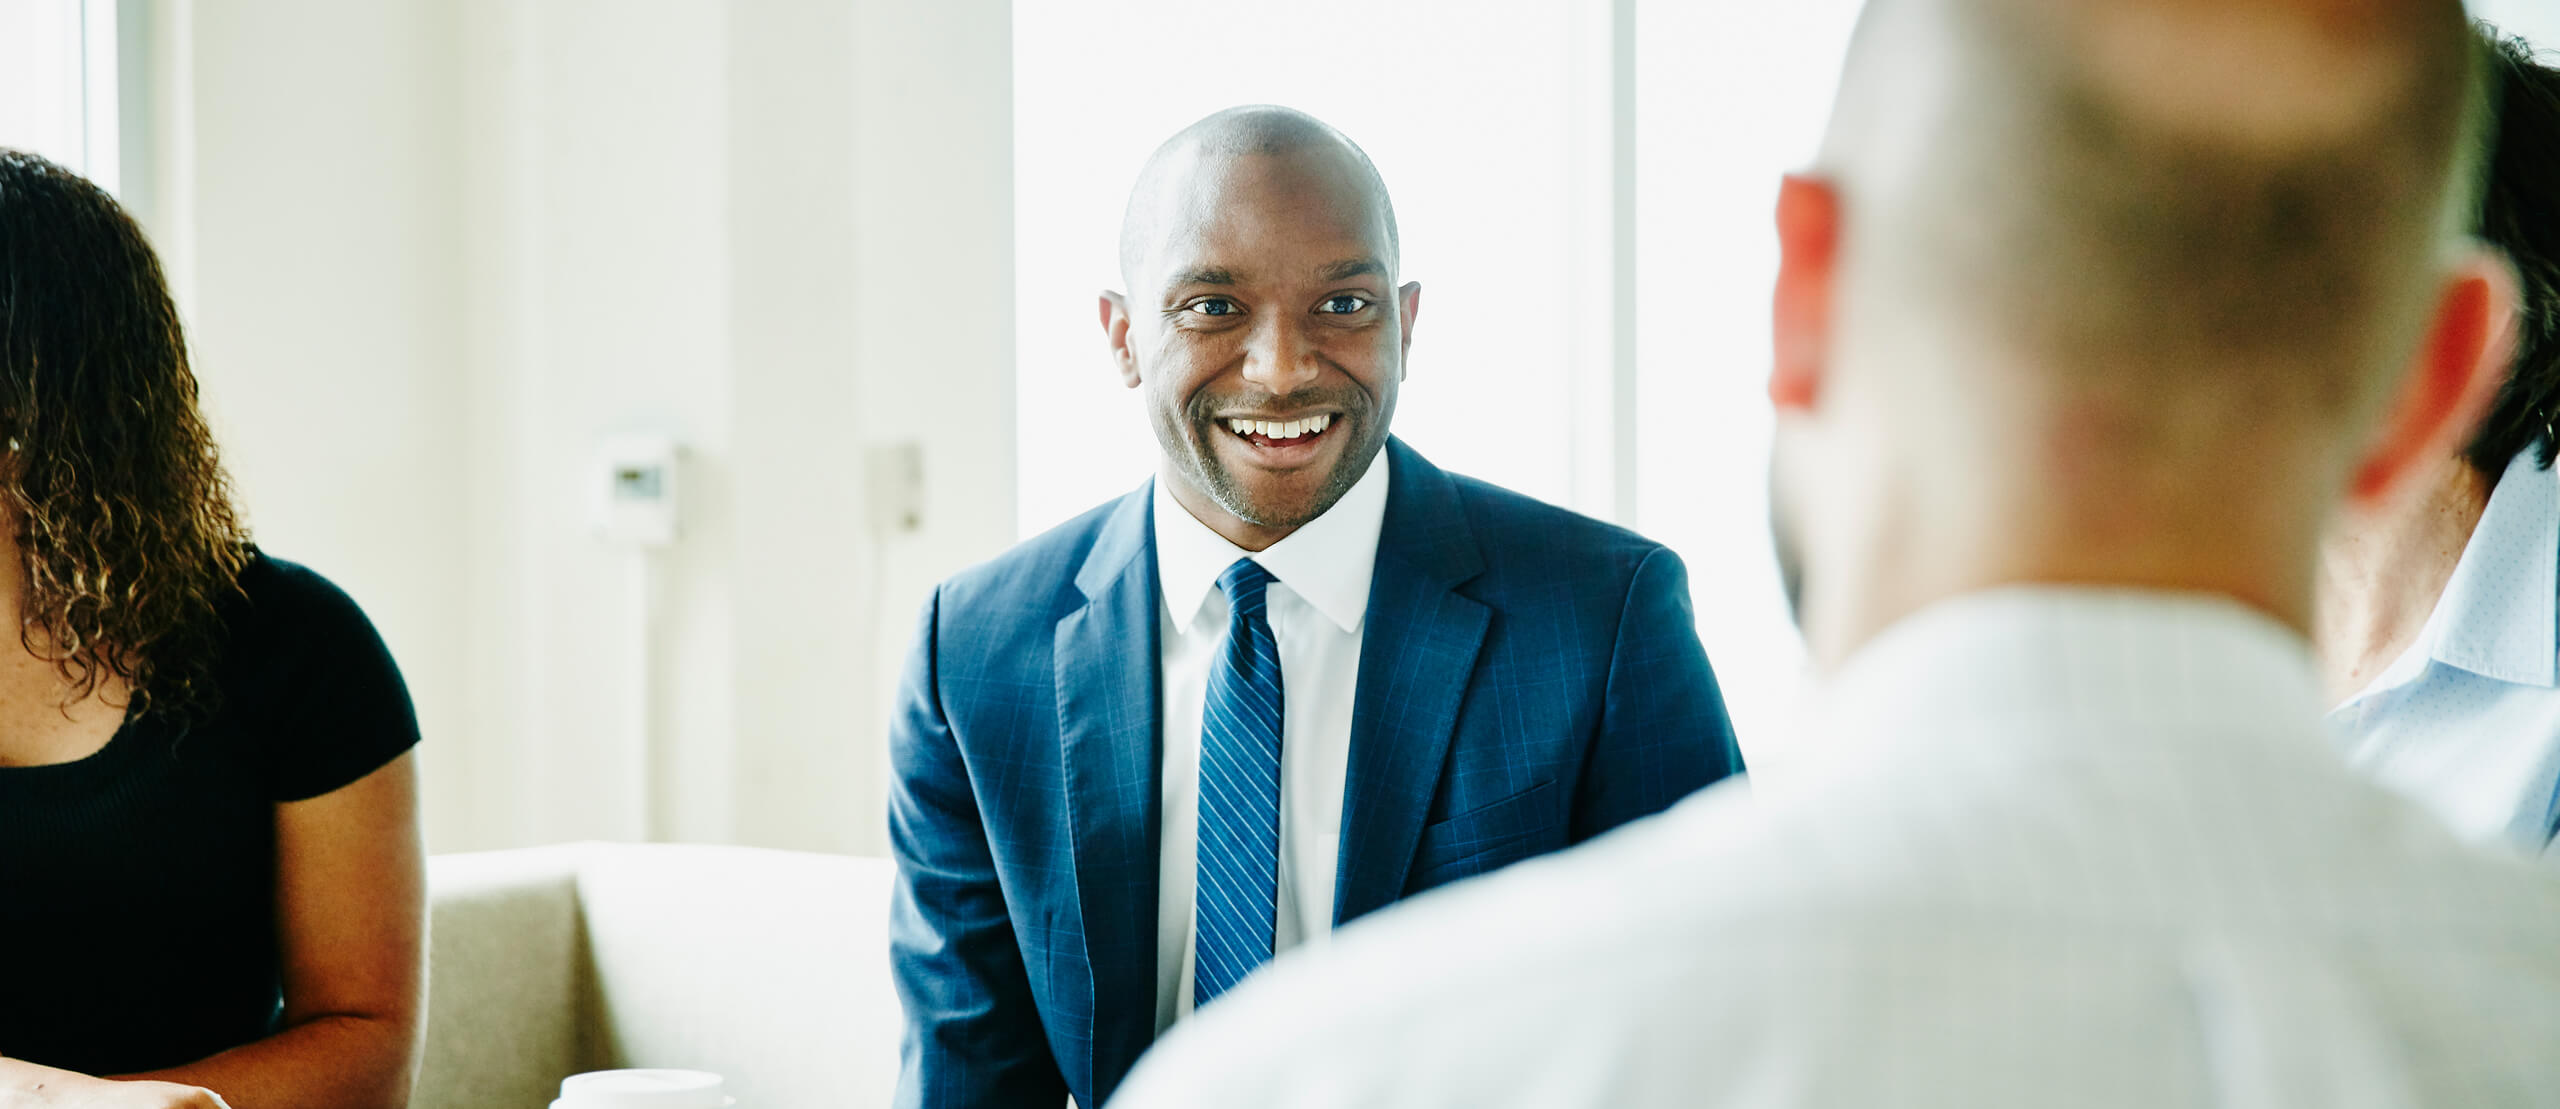 Smiling Businessman In Discussion With Colleagues